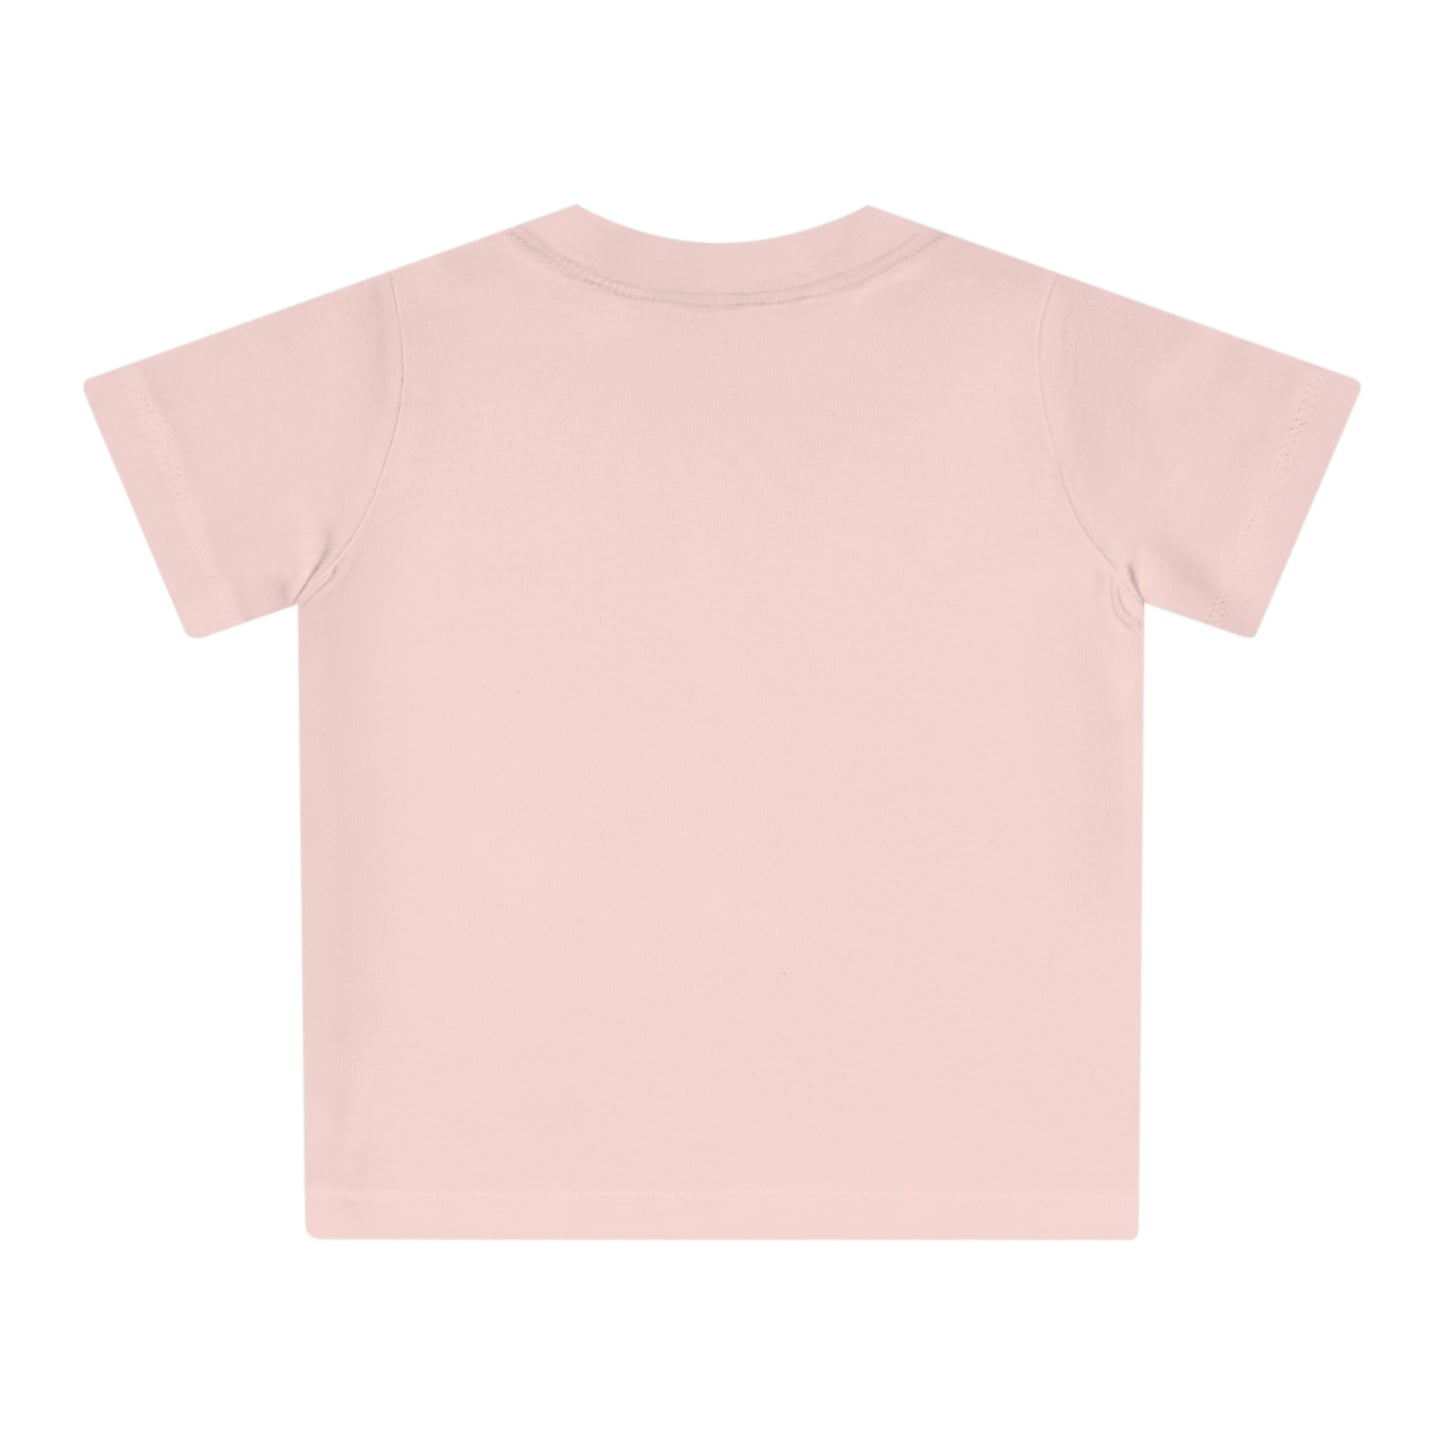 Organic Baby T-Shirt in Blue, White, Pink, Black, and Navy